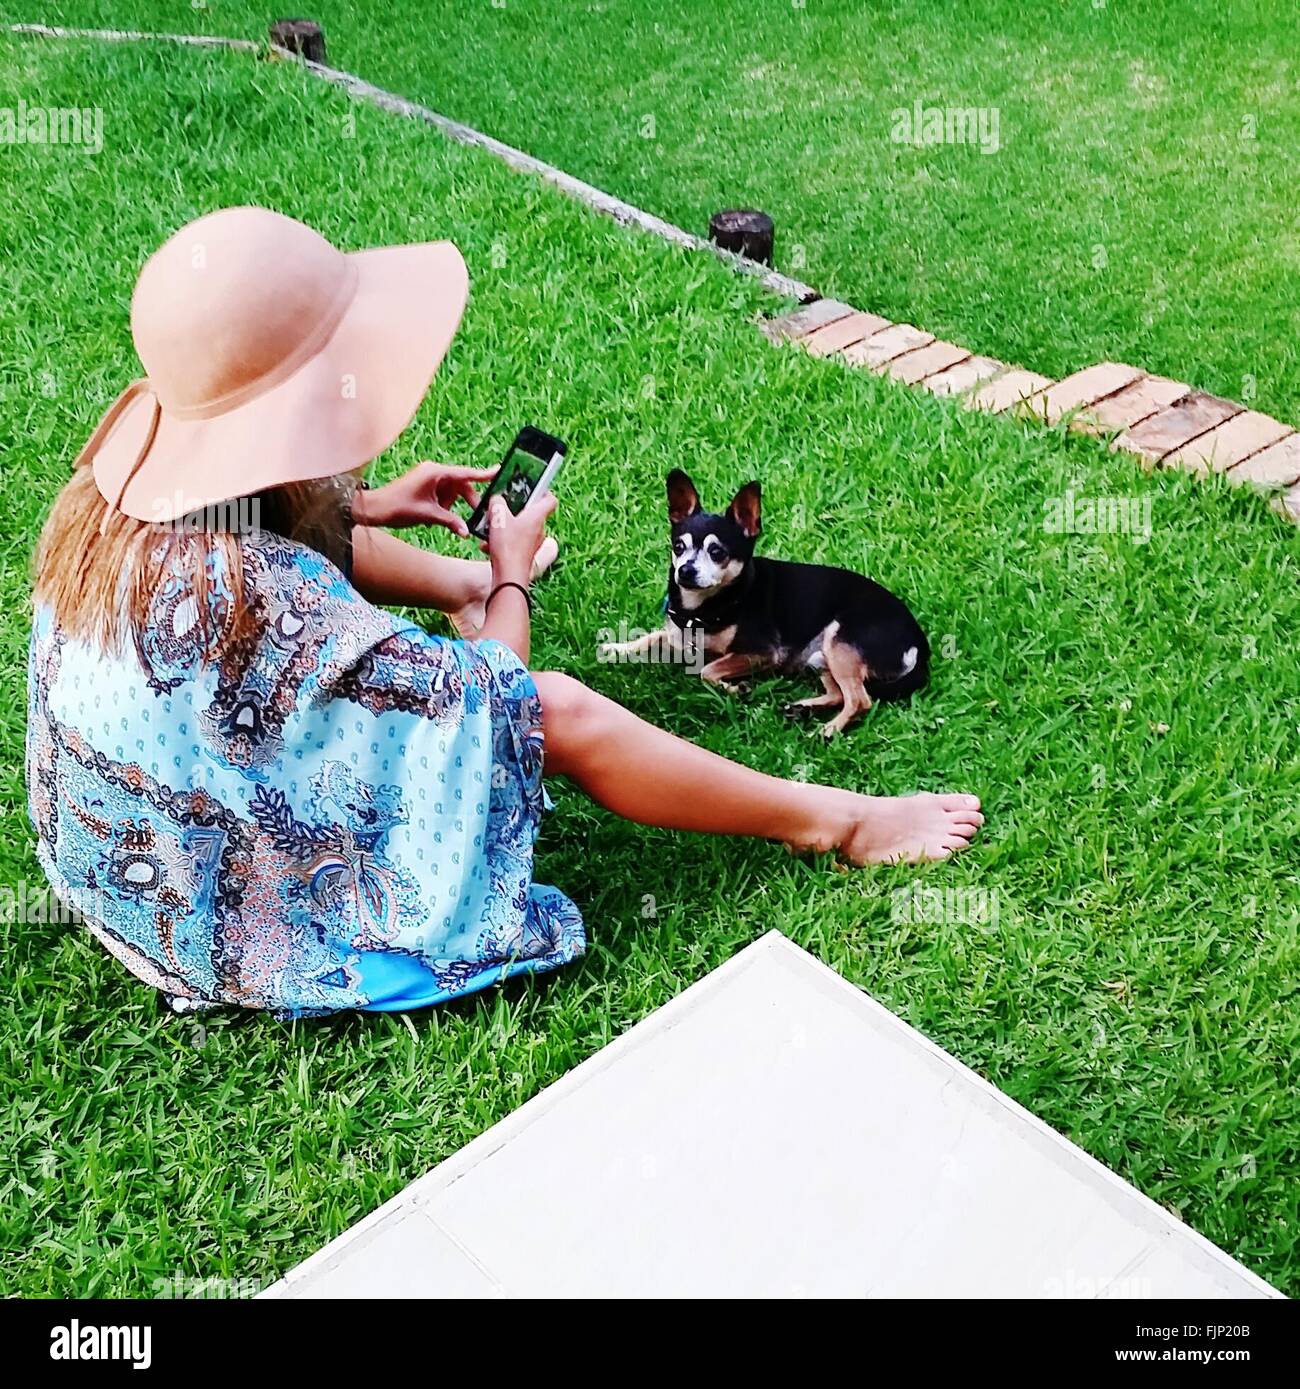 High Angle View Of Girl Taking Picture Of Pet Dog Stock Photo